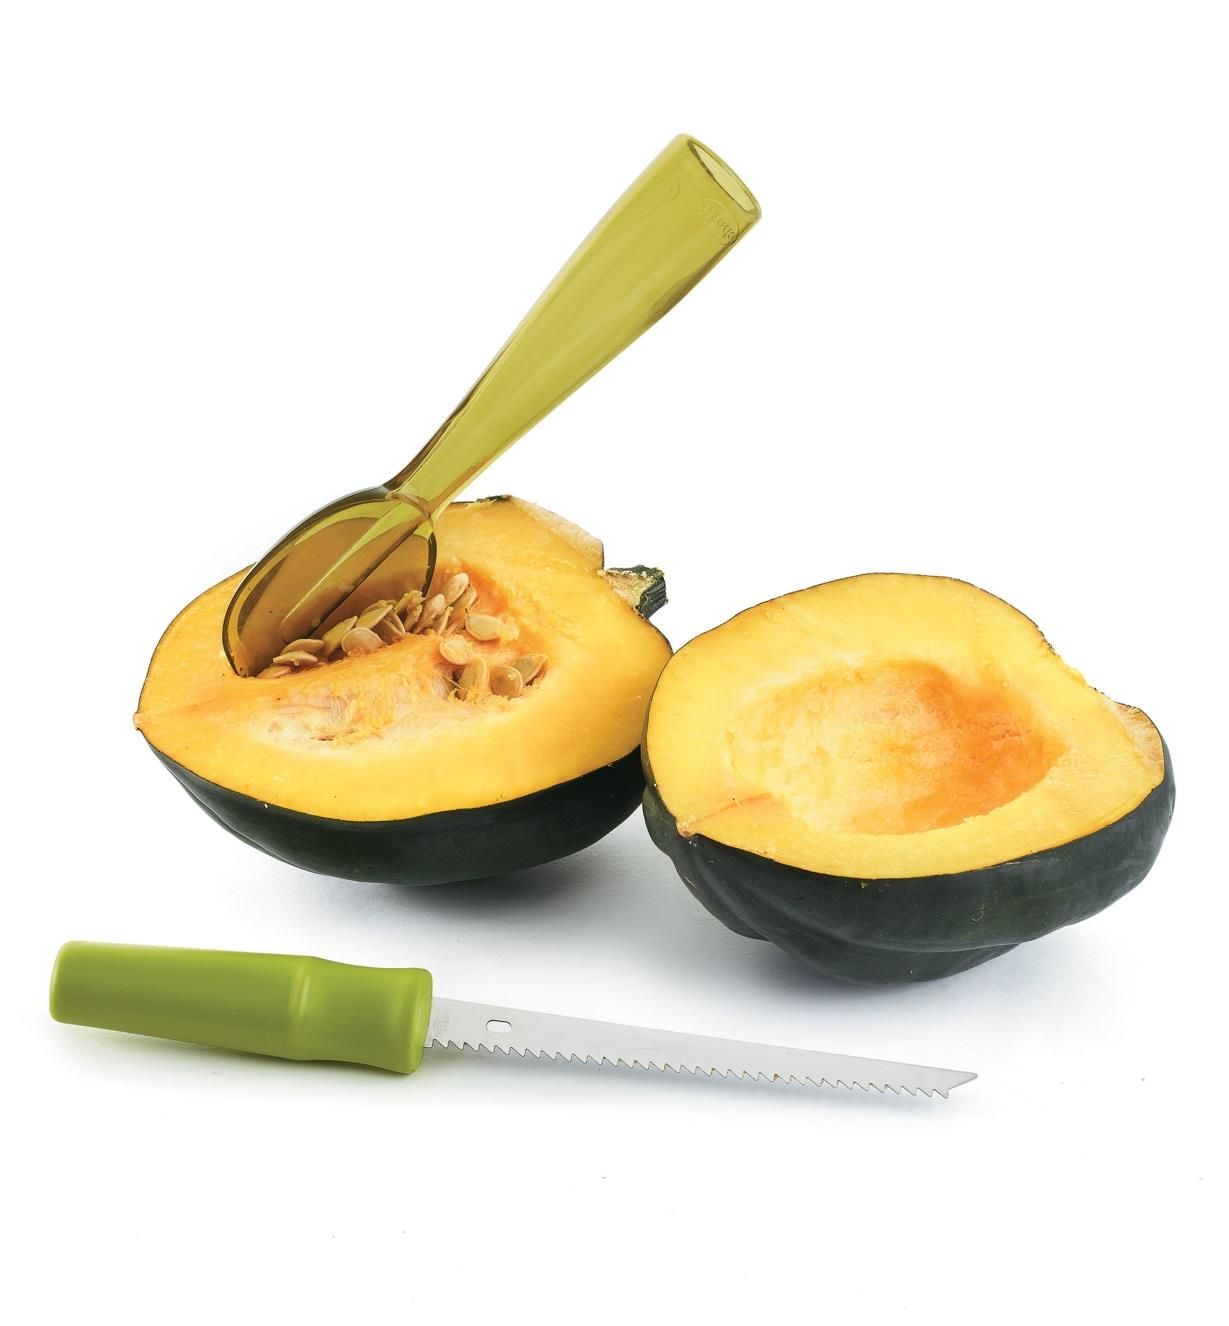 Scoop being used to remove seeds from a squash